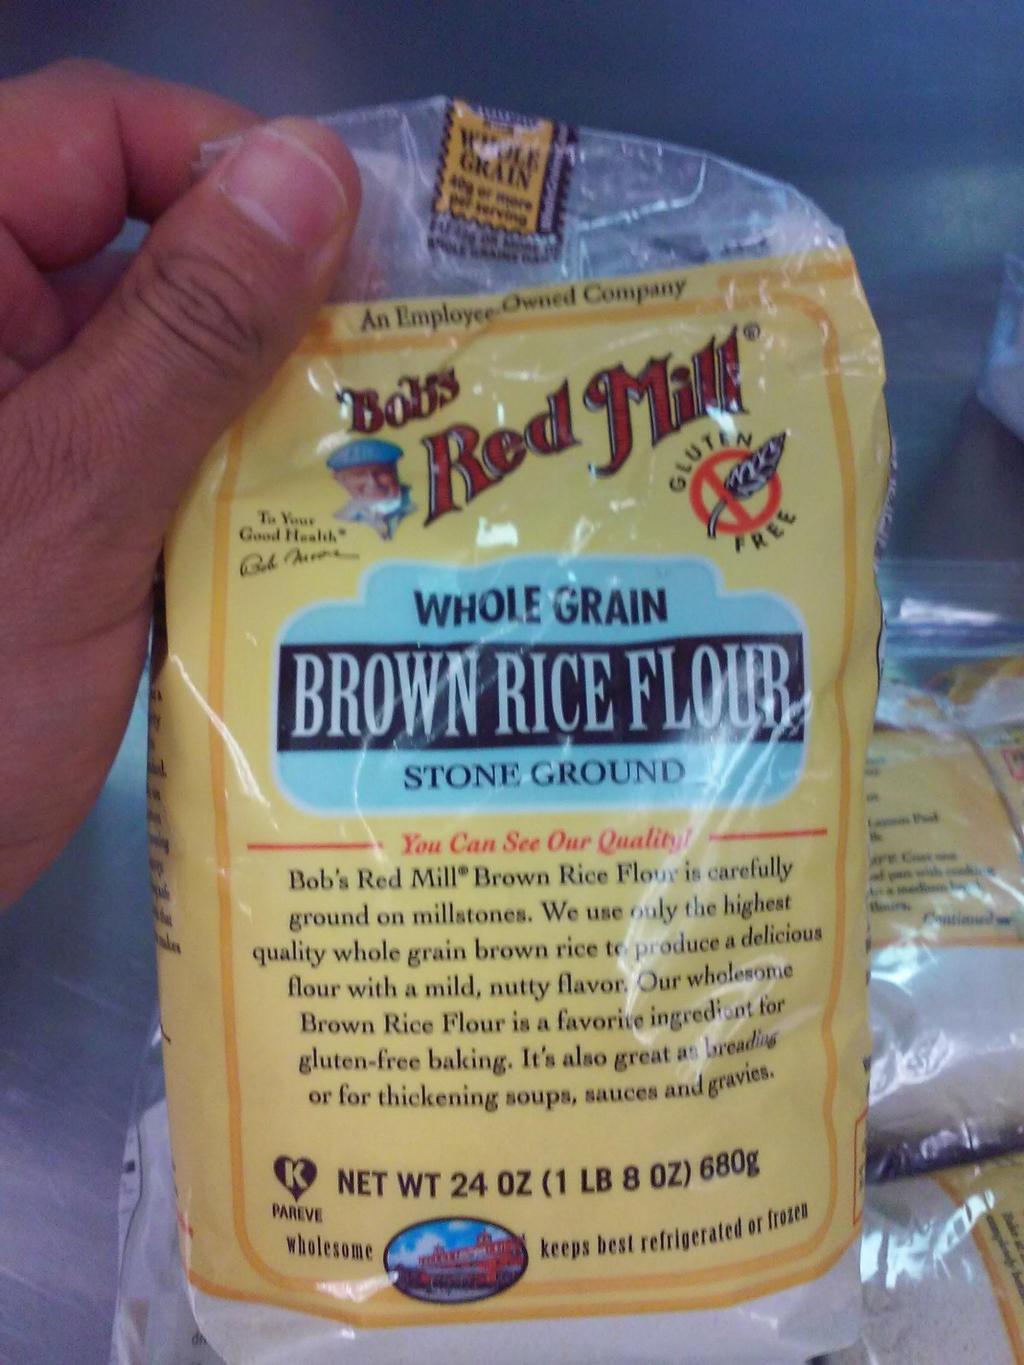 and 20% Brown Rice